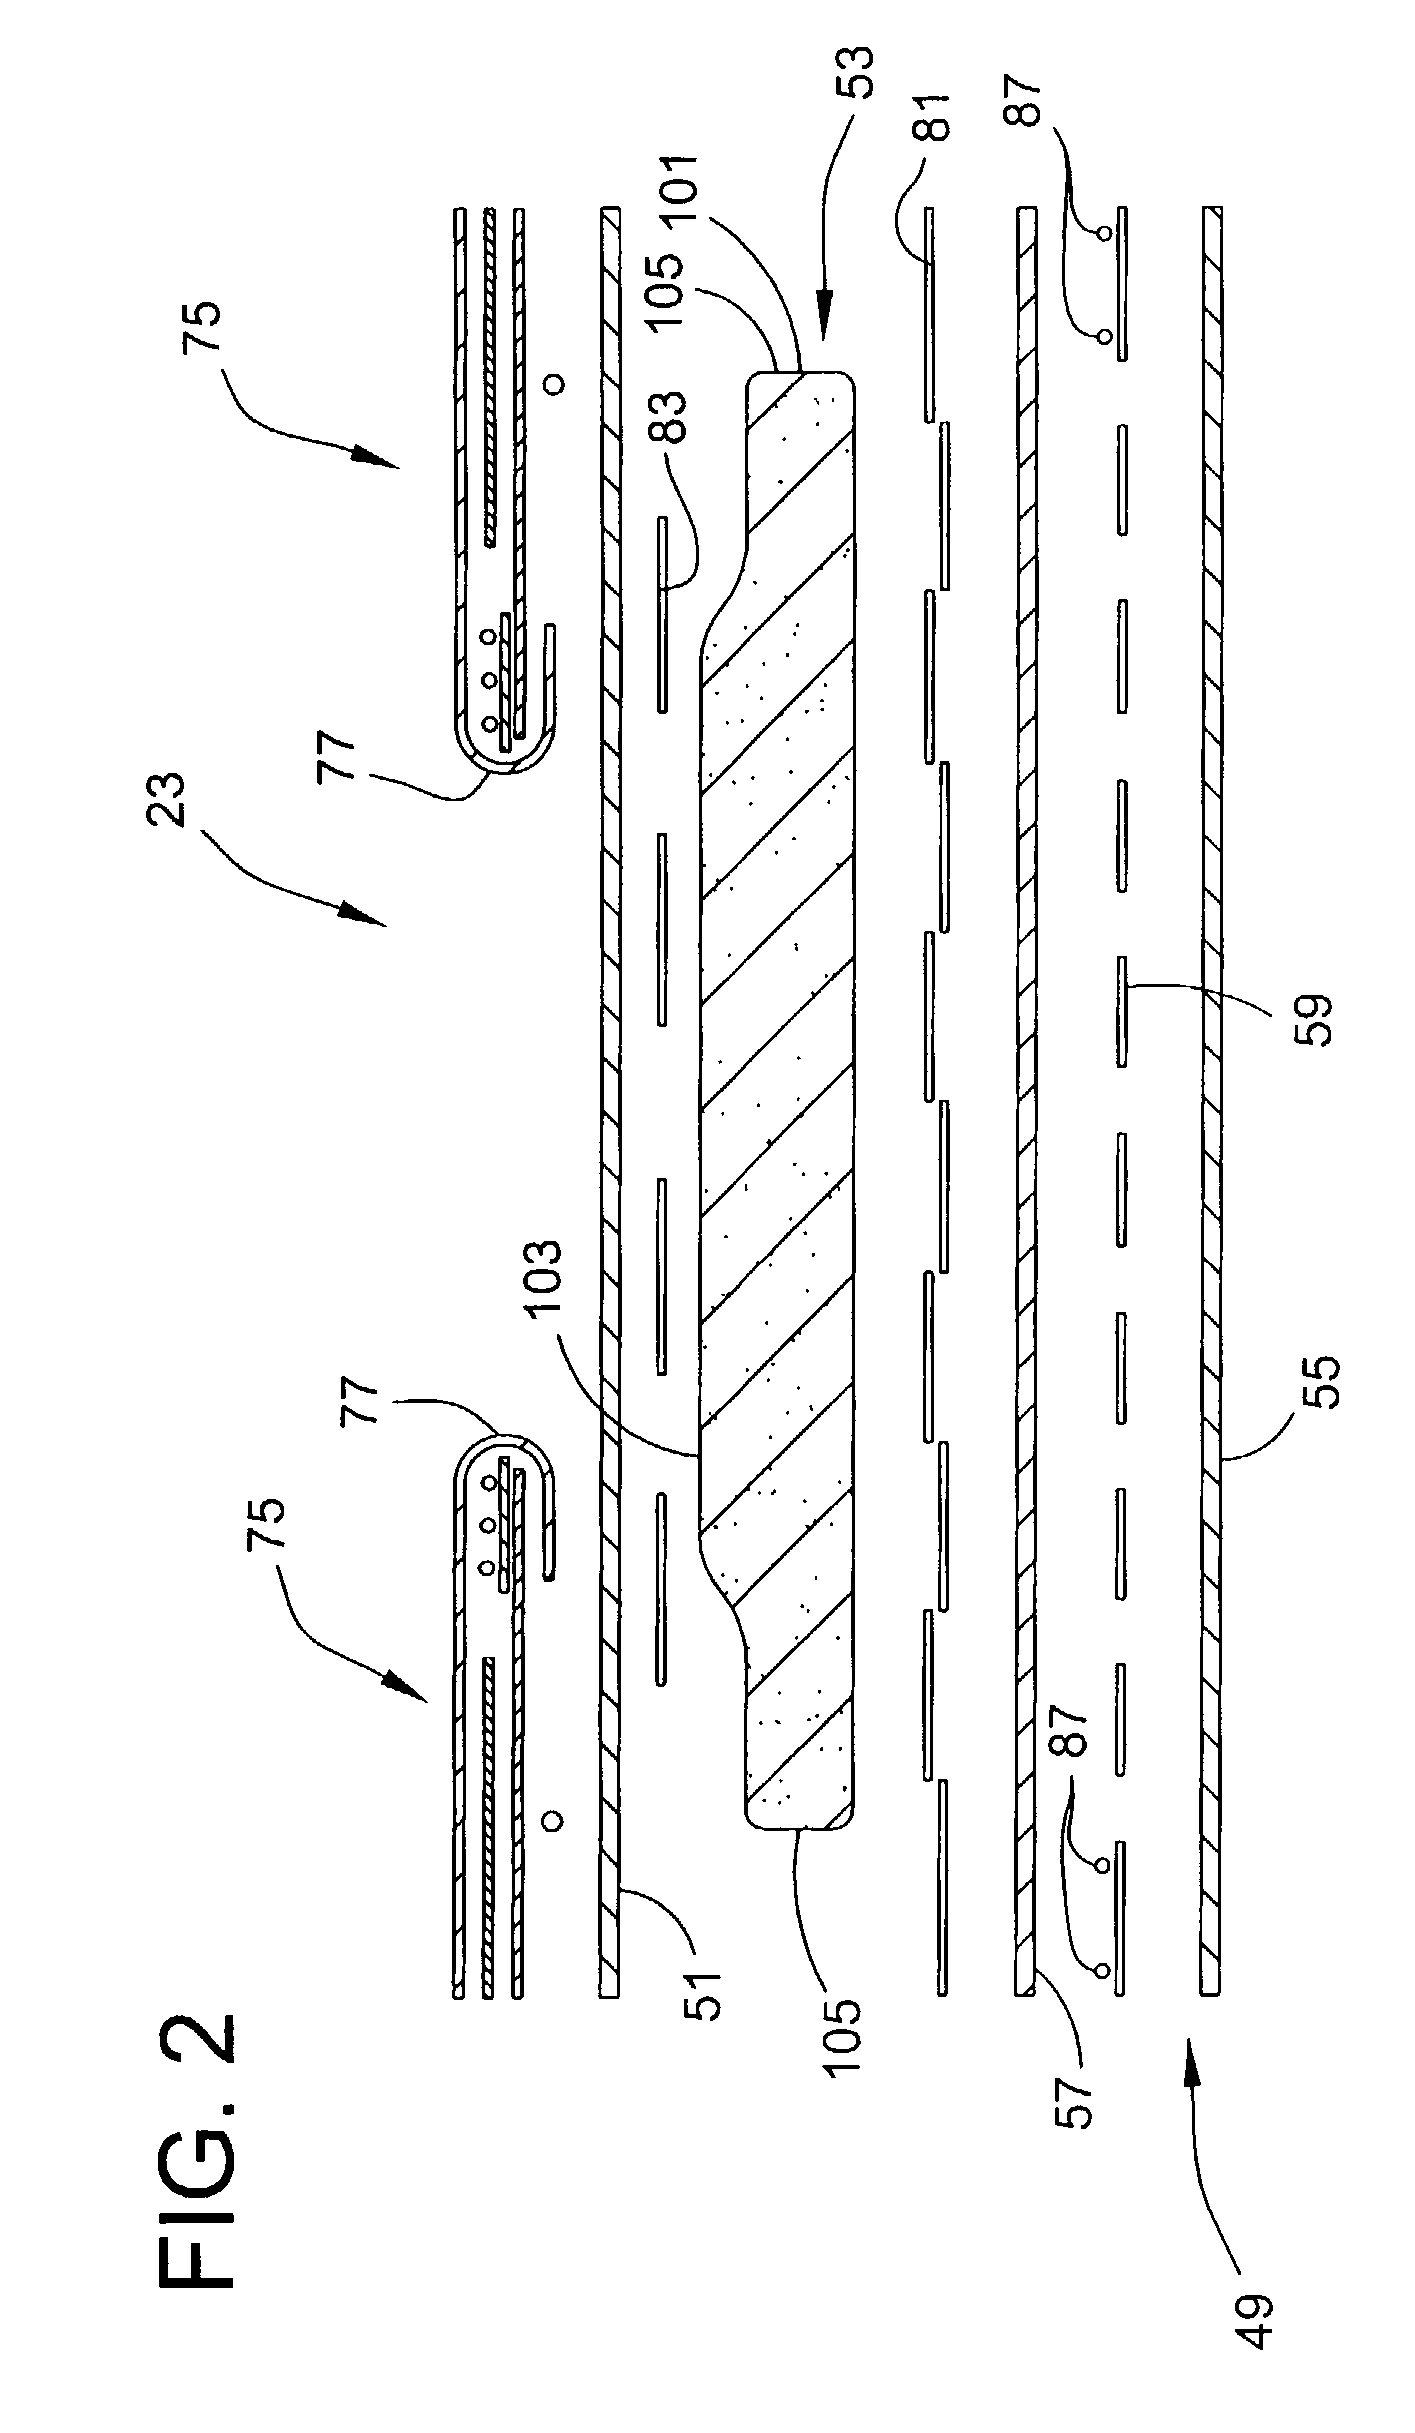 Absorbent article with stabilized absorbent structure having non-uniform lateral compression stiffness